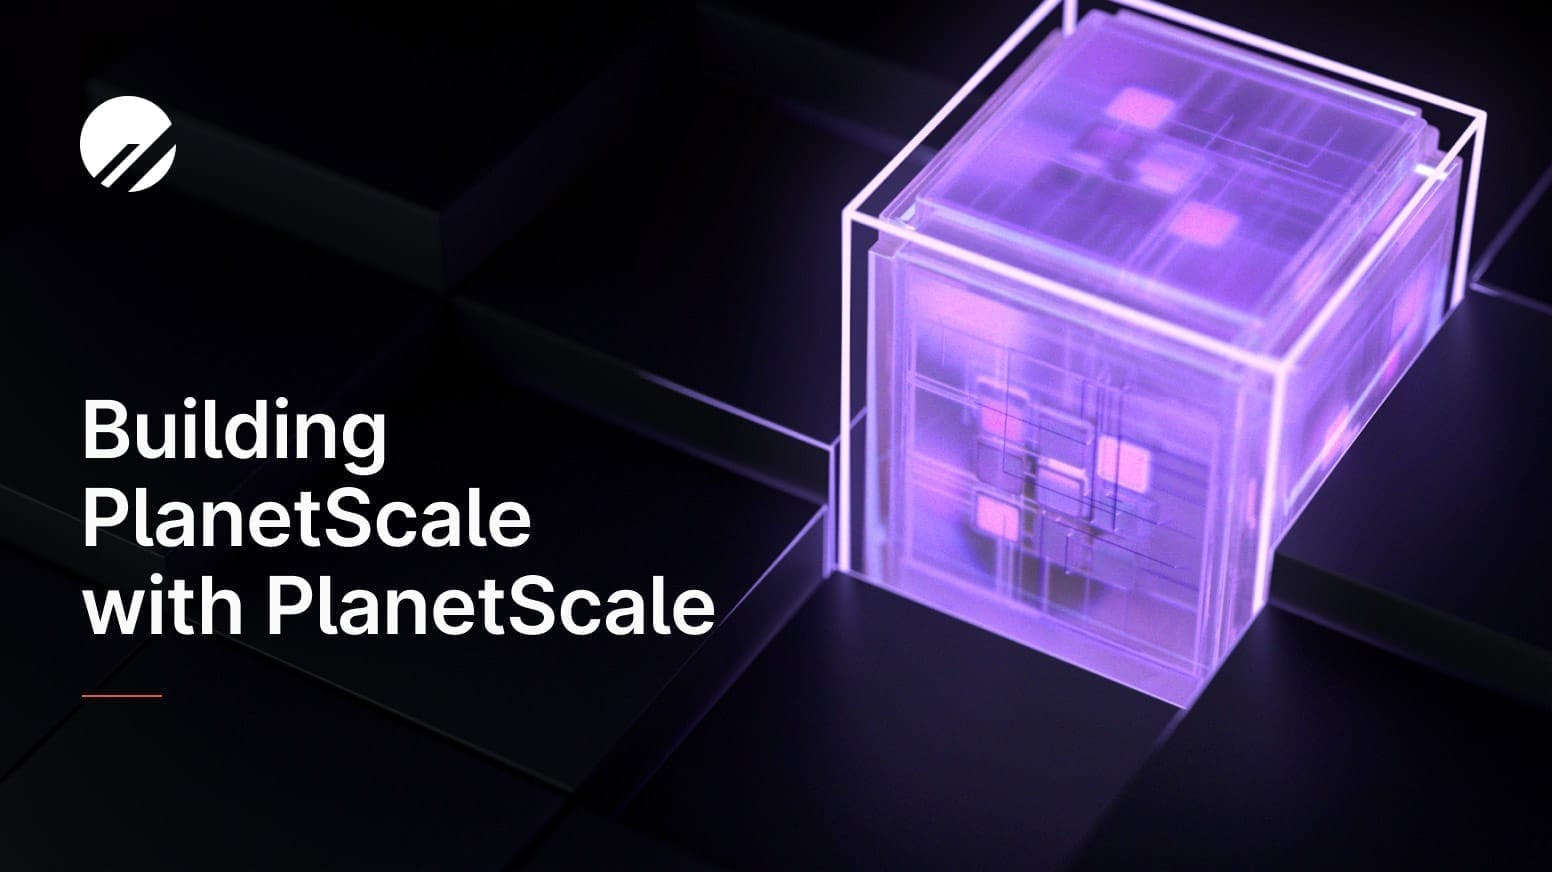 Building PlanetScale with PlanetScale